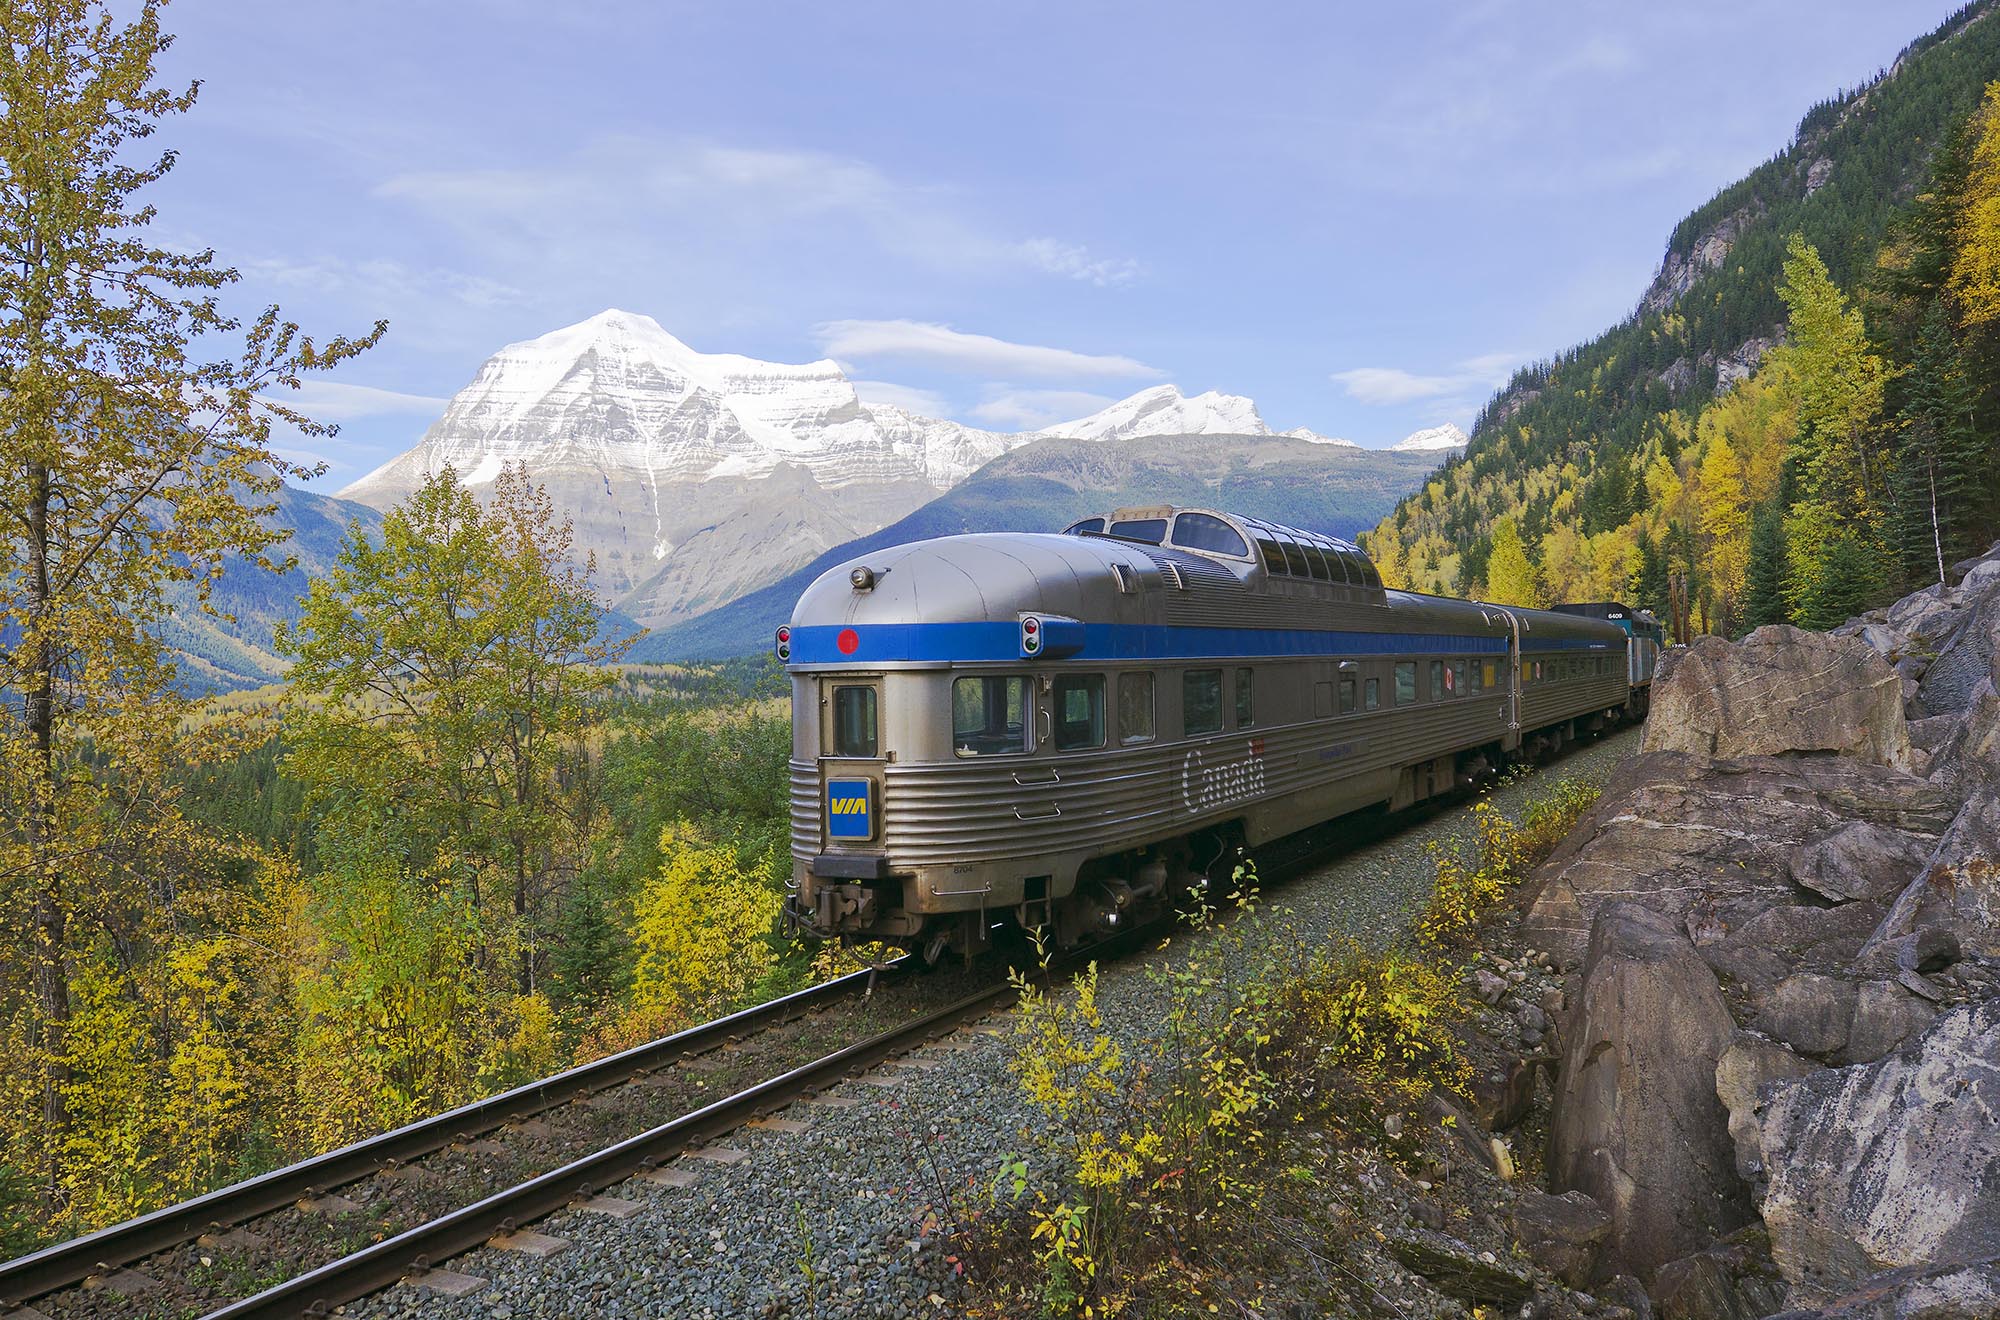 Toronto to Vancouver by Rail